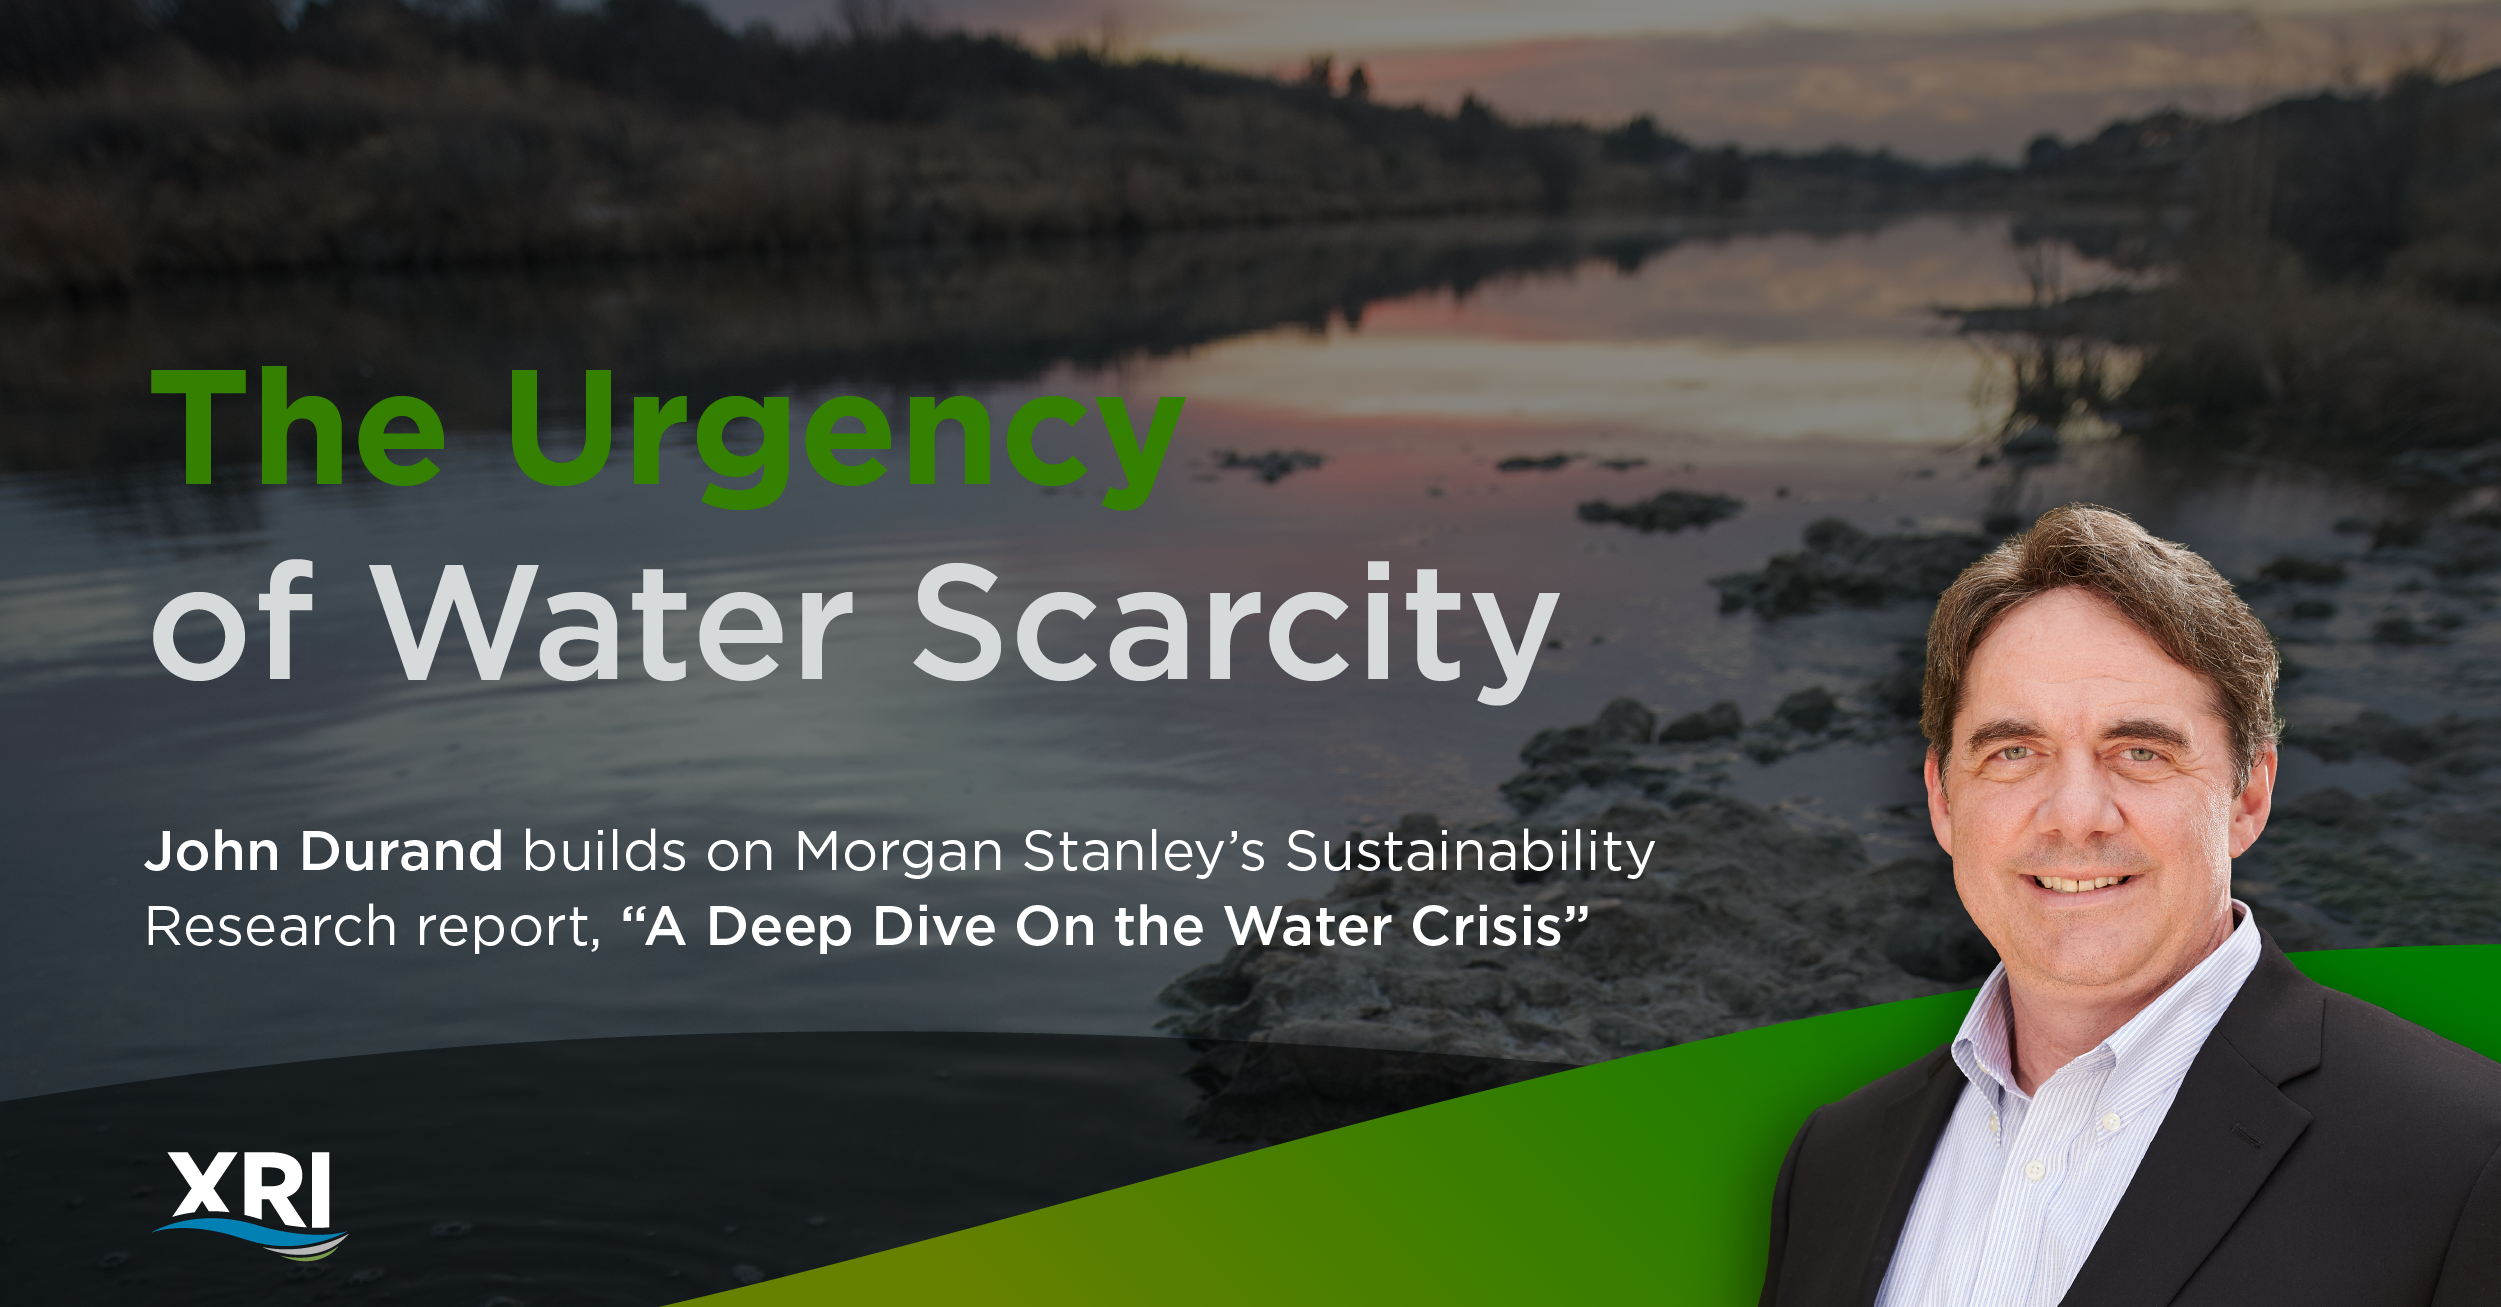 The urgency of water scarcity